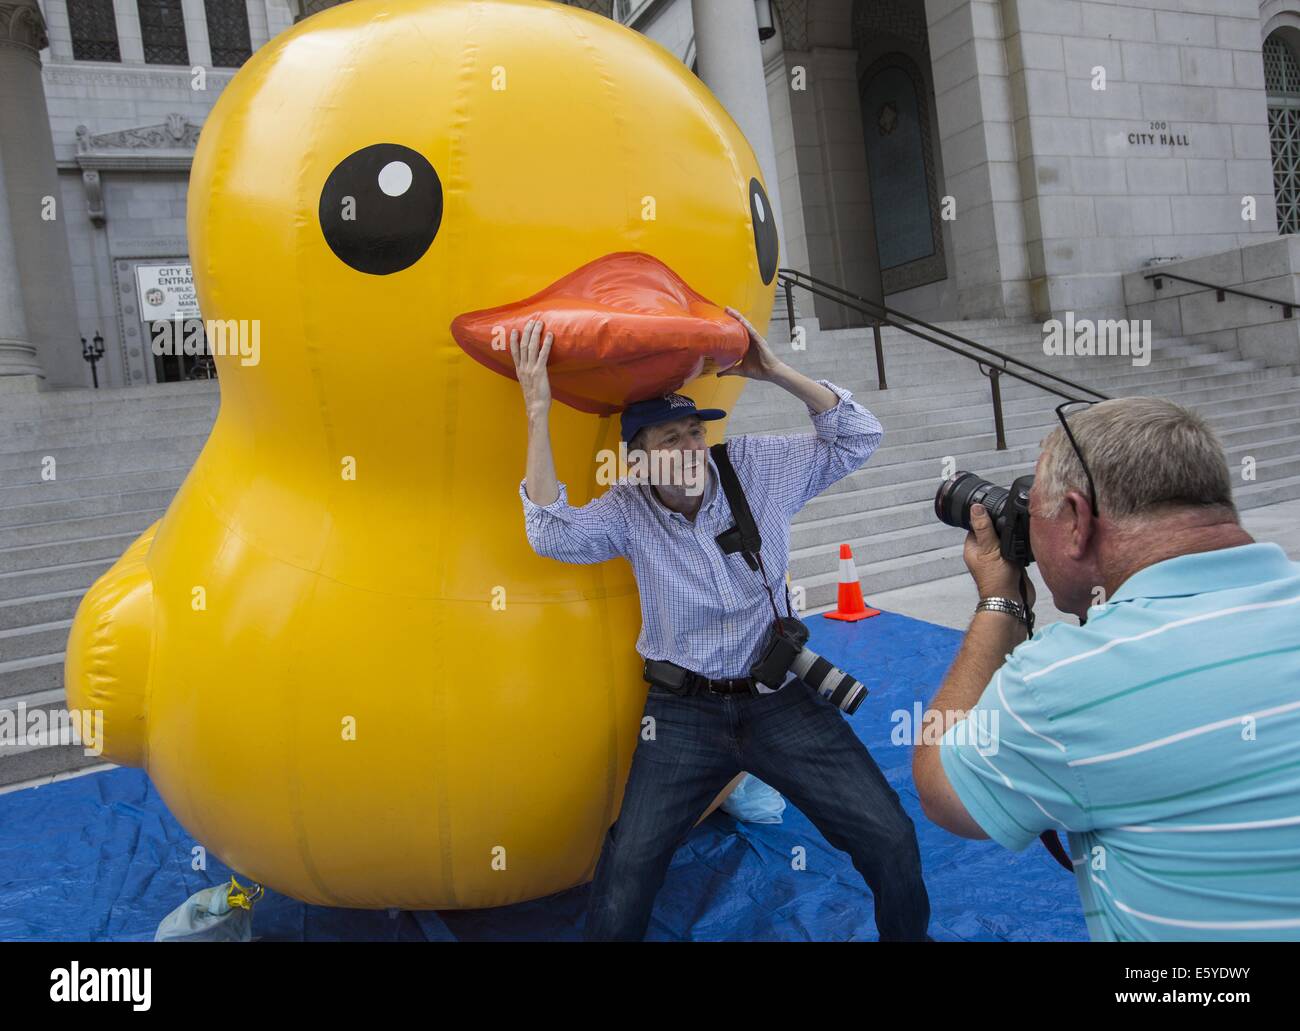 Los Angeles, California, USA. 8th Aug, 2014. Los Angeles Times photographer Gary Friedman poses with a 10-foot-tall rubber ducky ''baby duck'' squatting on the Spring Street steps of Los Angeles City Hall on Friday, Aug. 8, 2014, in Los Angeles. The bright yellow, inflatable ducky is wandering the city in search of its mother, a 60 feet high and dubbed by event organizers as the world's largest rubber ducky as part of a promotional stunt for the Tall Ships Festival taking place Aug. 20-24 at the Port of Los Angeles. Credit:  Ringo Chiu/ZUMA Wire/Alamy Live News Stock Photo